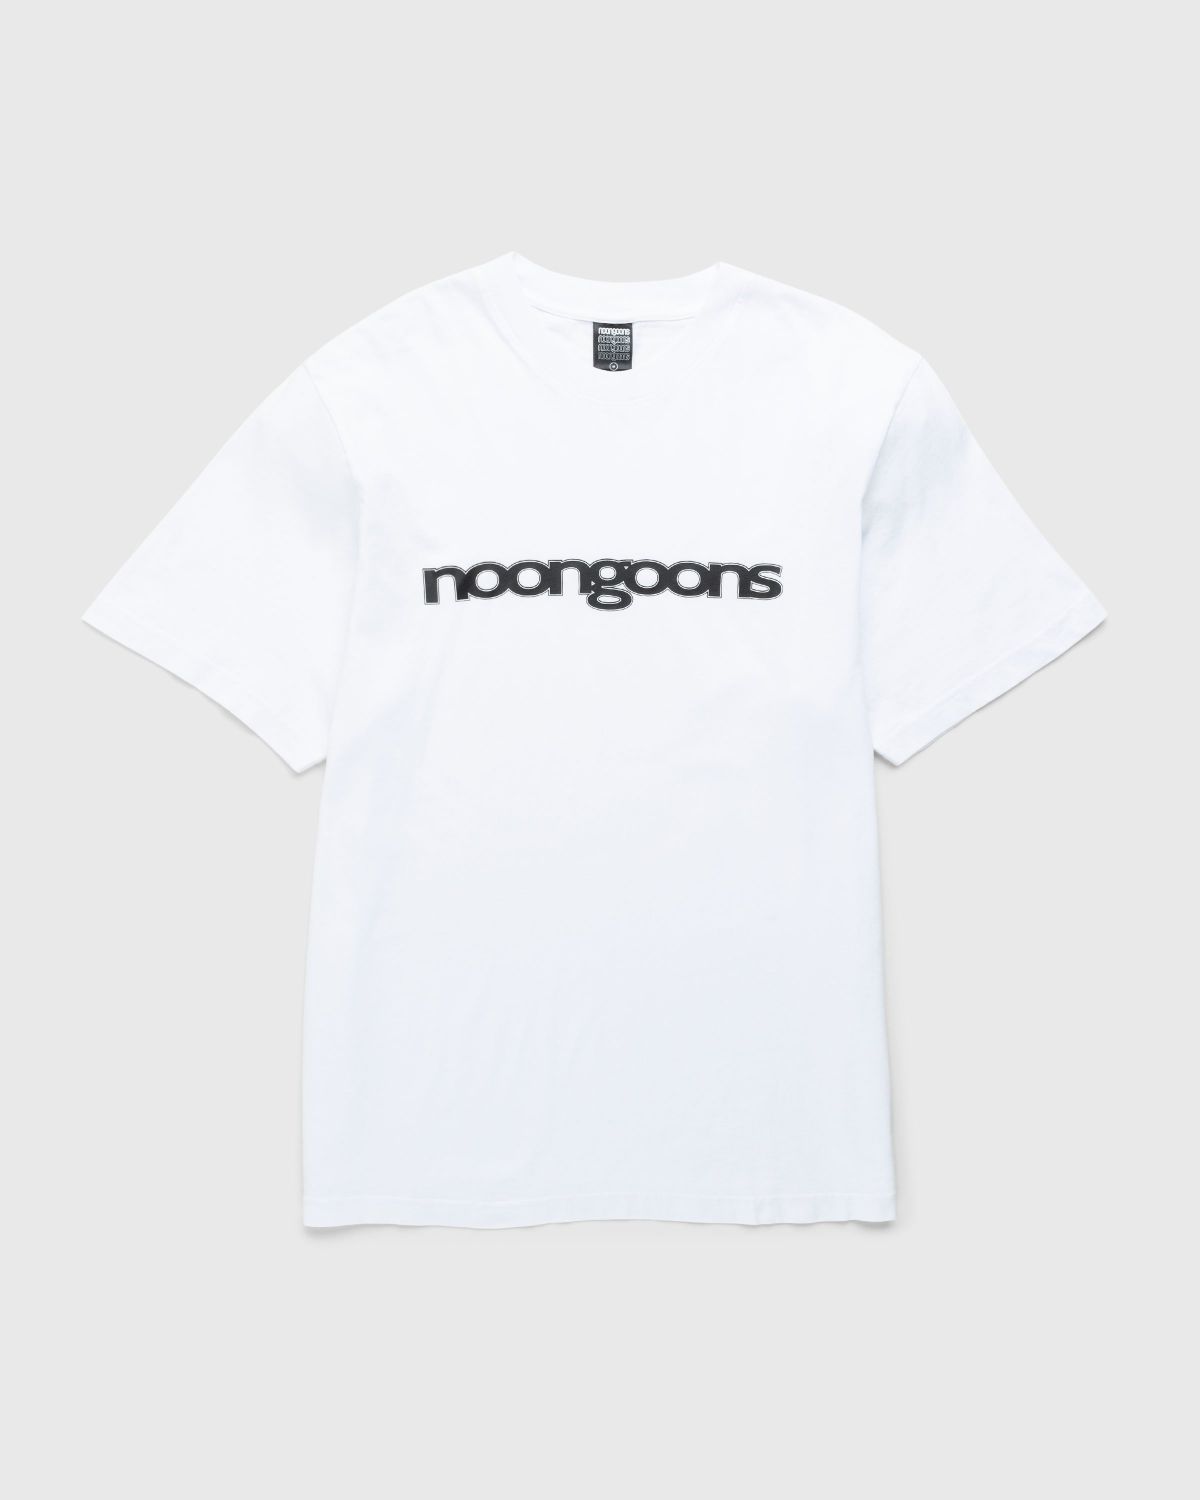 Noon Goons – Very Simple T-Shirt White | Highsnobiety Shop